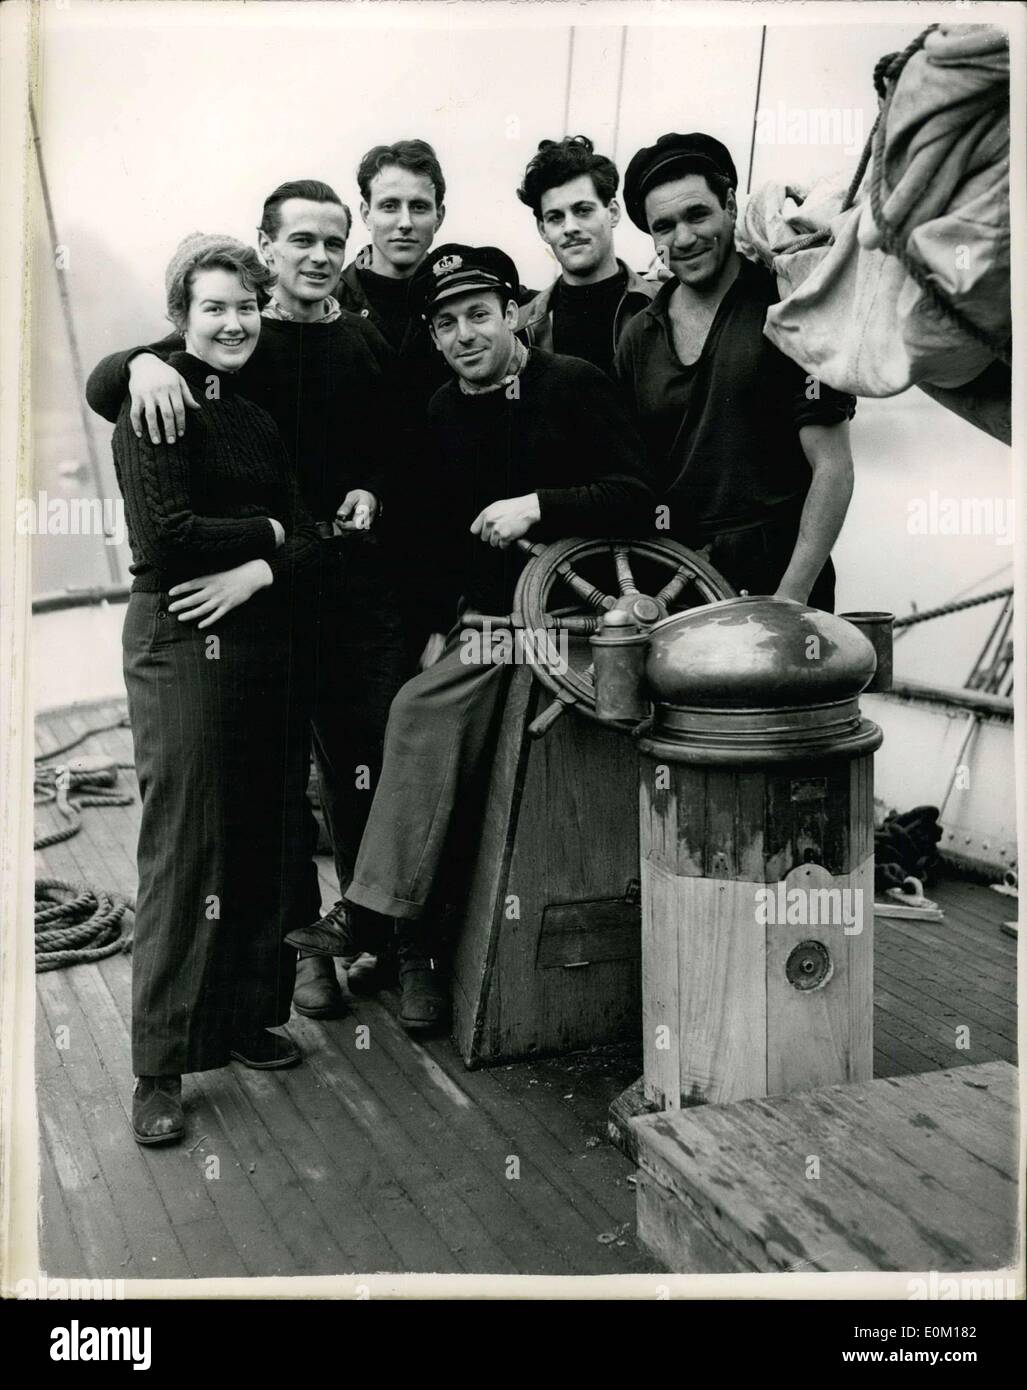 Jan. 16, 1953 - Getting Ready for 30,000 Mile Voyage in Yacht. Six Members aboard the ''Asta''. A party of nine people are preparing their 88 tons ex German Ketch ''Asta'' in the Hamble River, Hampshire for the start of their 30,000 miles ''Roundabout'' voyage to San Fransisco via the Mediterranean, the Red Sea, Ceylon and the East Indies. The Vessel will be under the command of Frenchmen Richard Aramburu who was a fisherman in South America and who comes from Marseilles. Keystone Photo Shows: Six members of the crew seen aboard the ''Asta'' at Hamble. They hope to leave on Friday Stock Photo